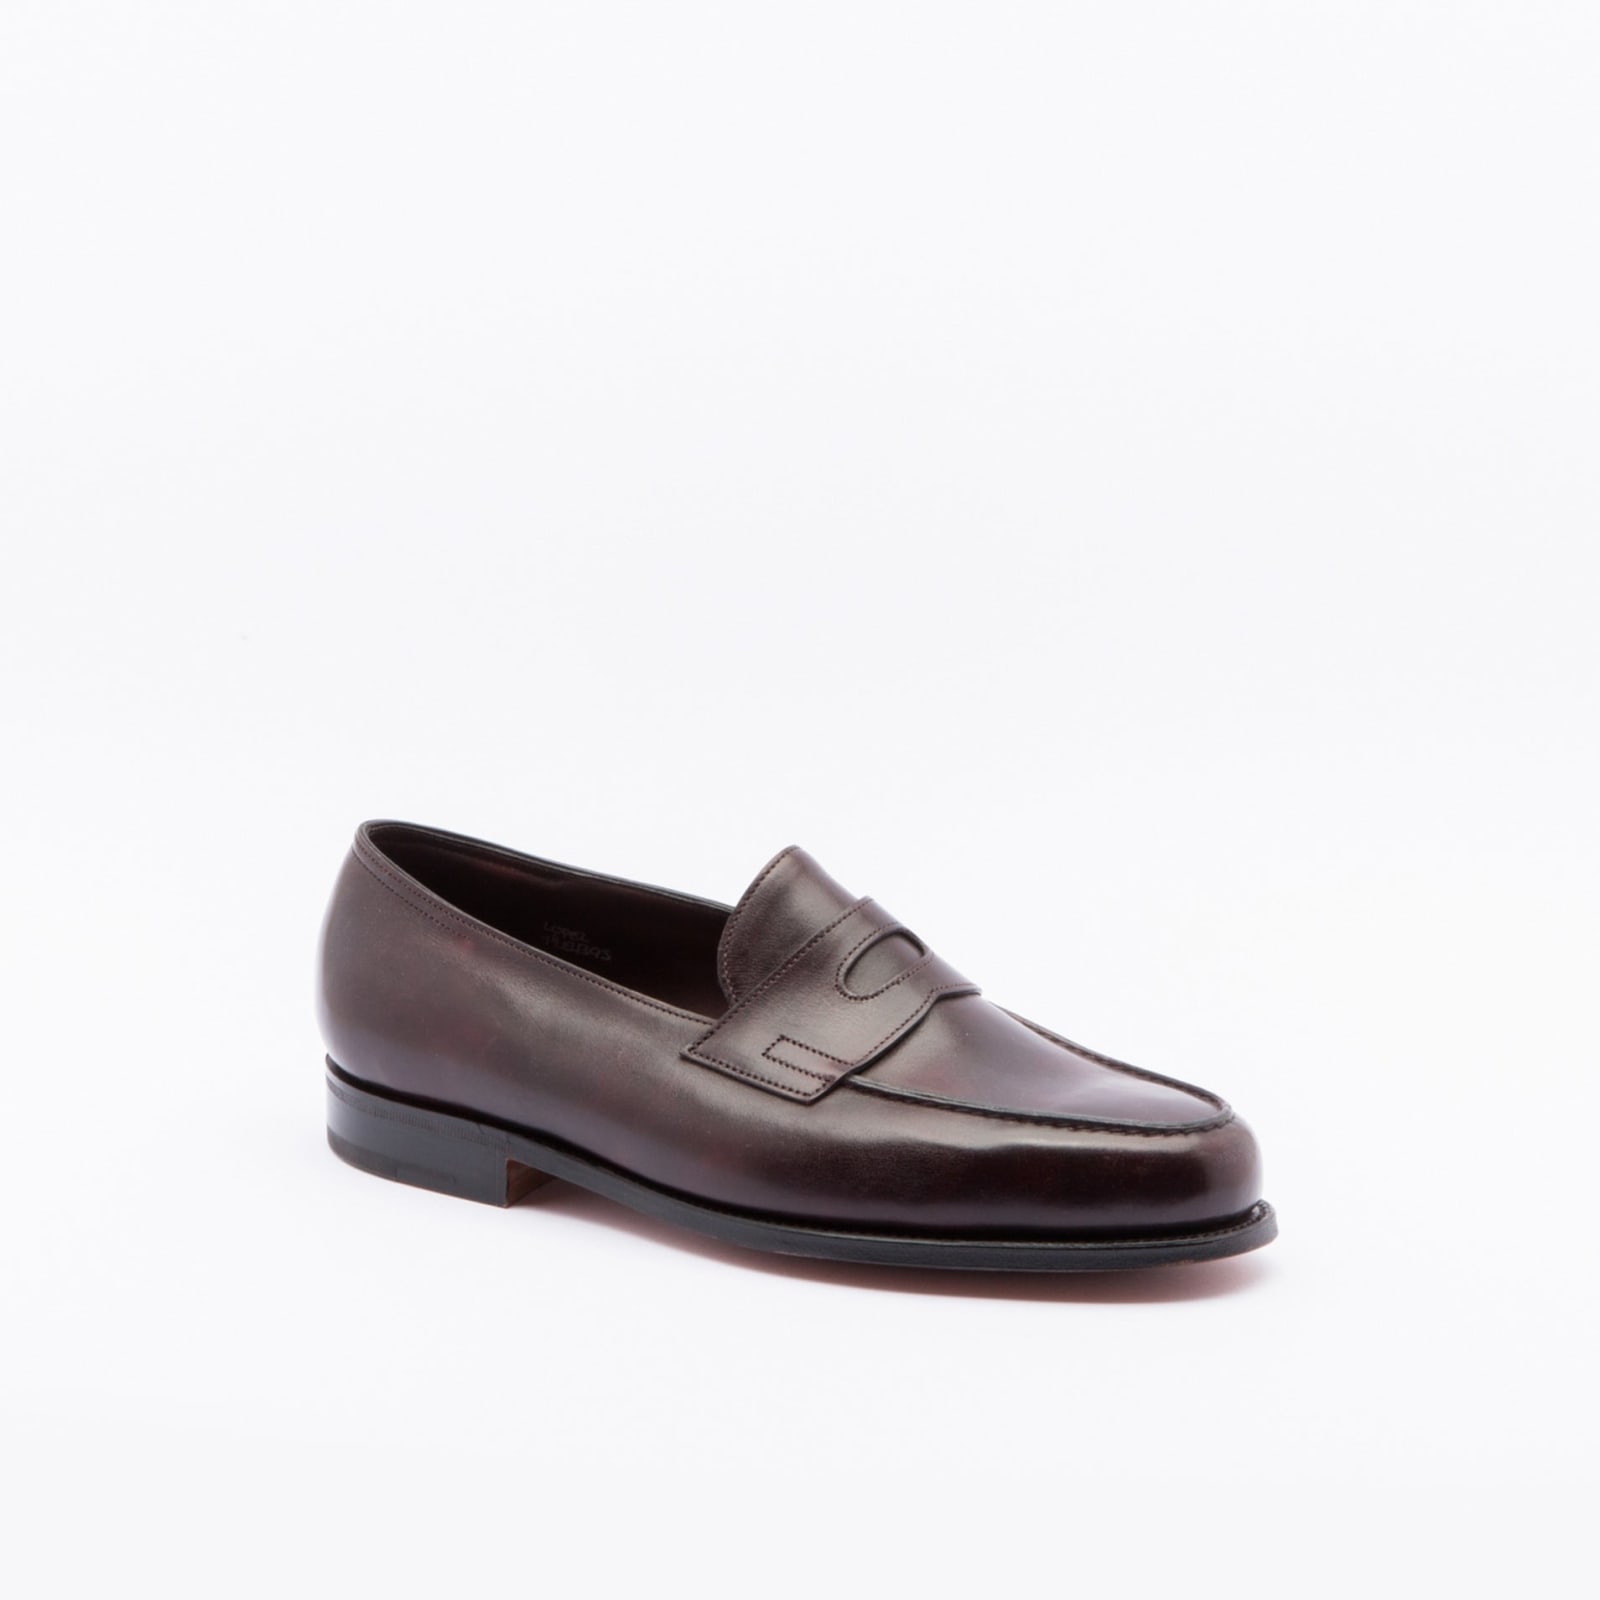 Lopez Loafer In Plum Museum Calf